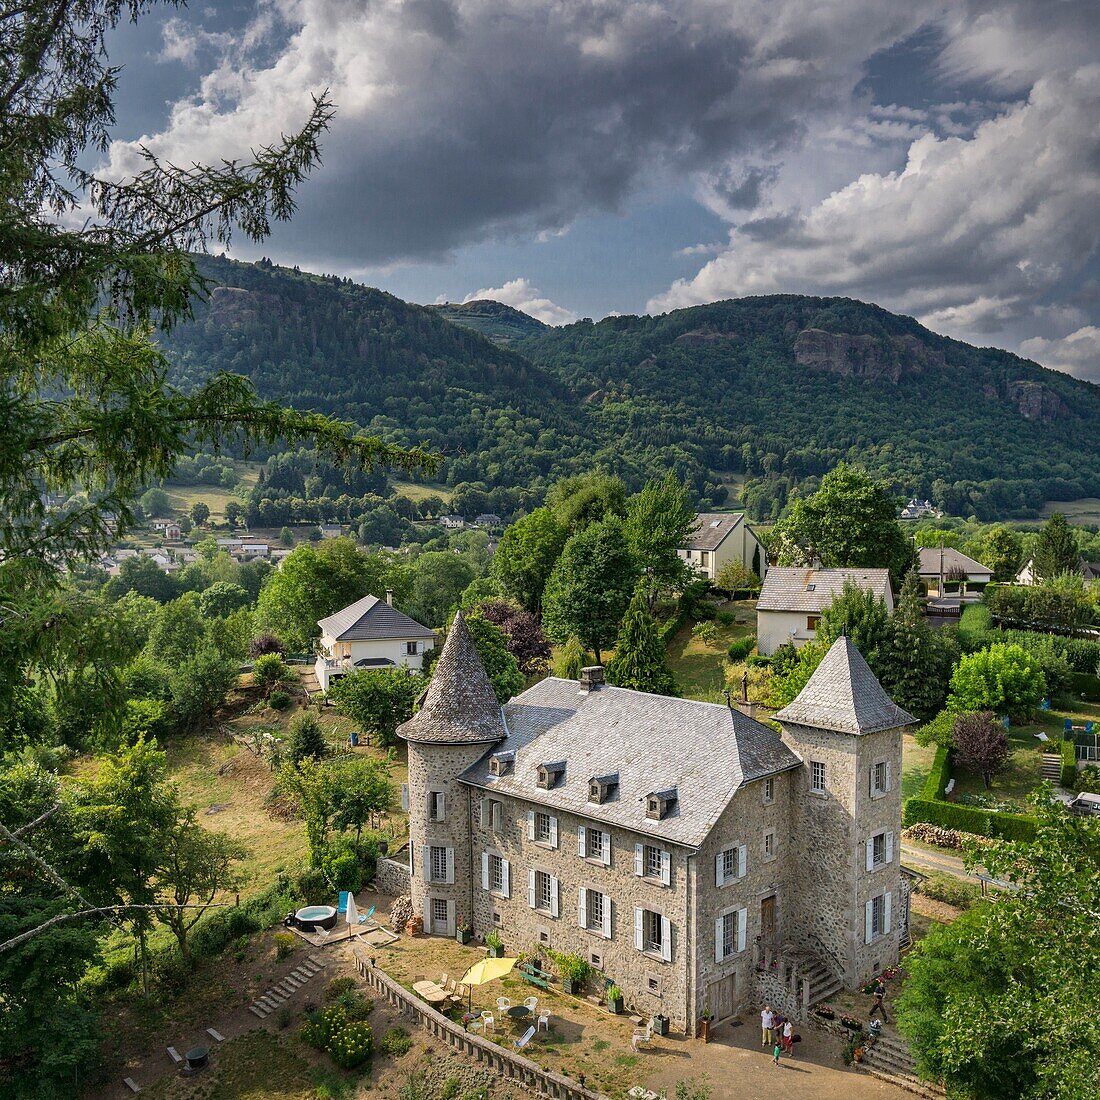 France, Cantal, Vic sur Cere, Ol Puech castel, bed and breakfast (aerial view)